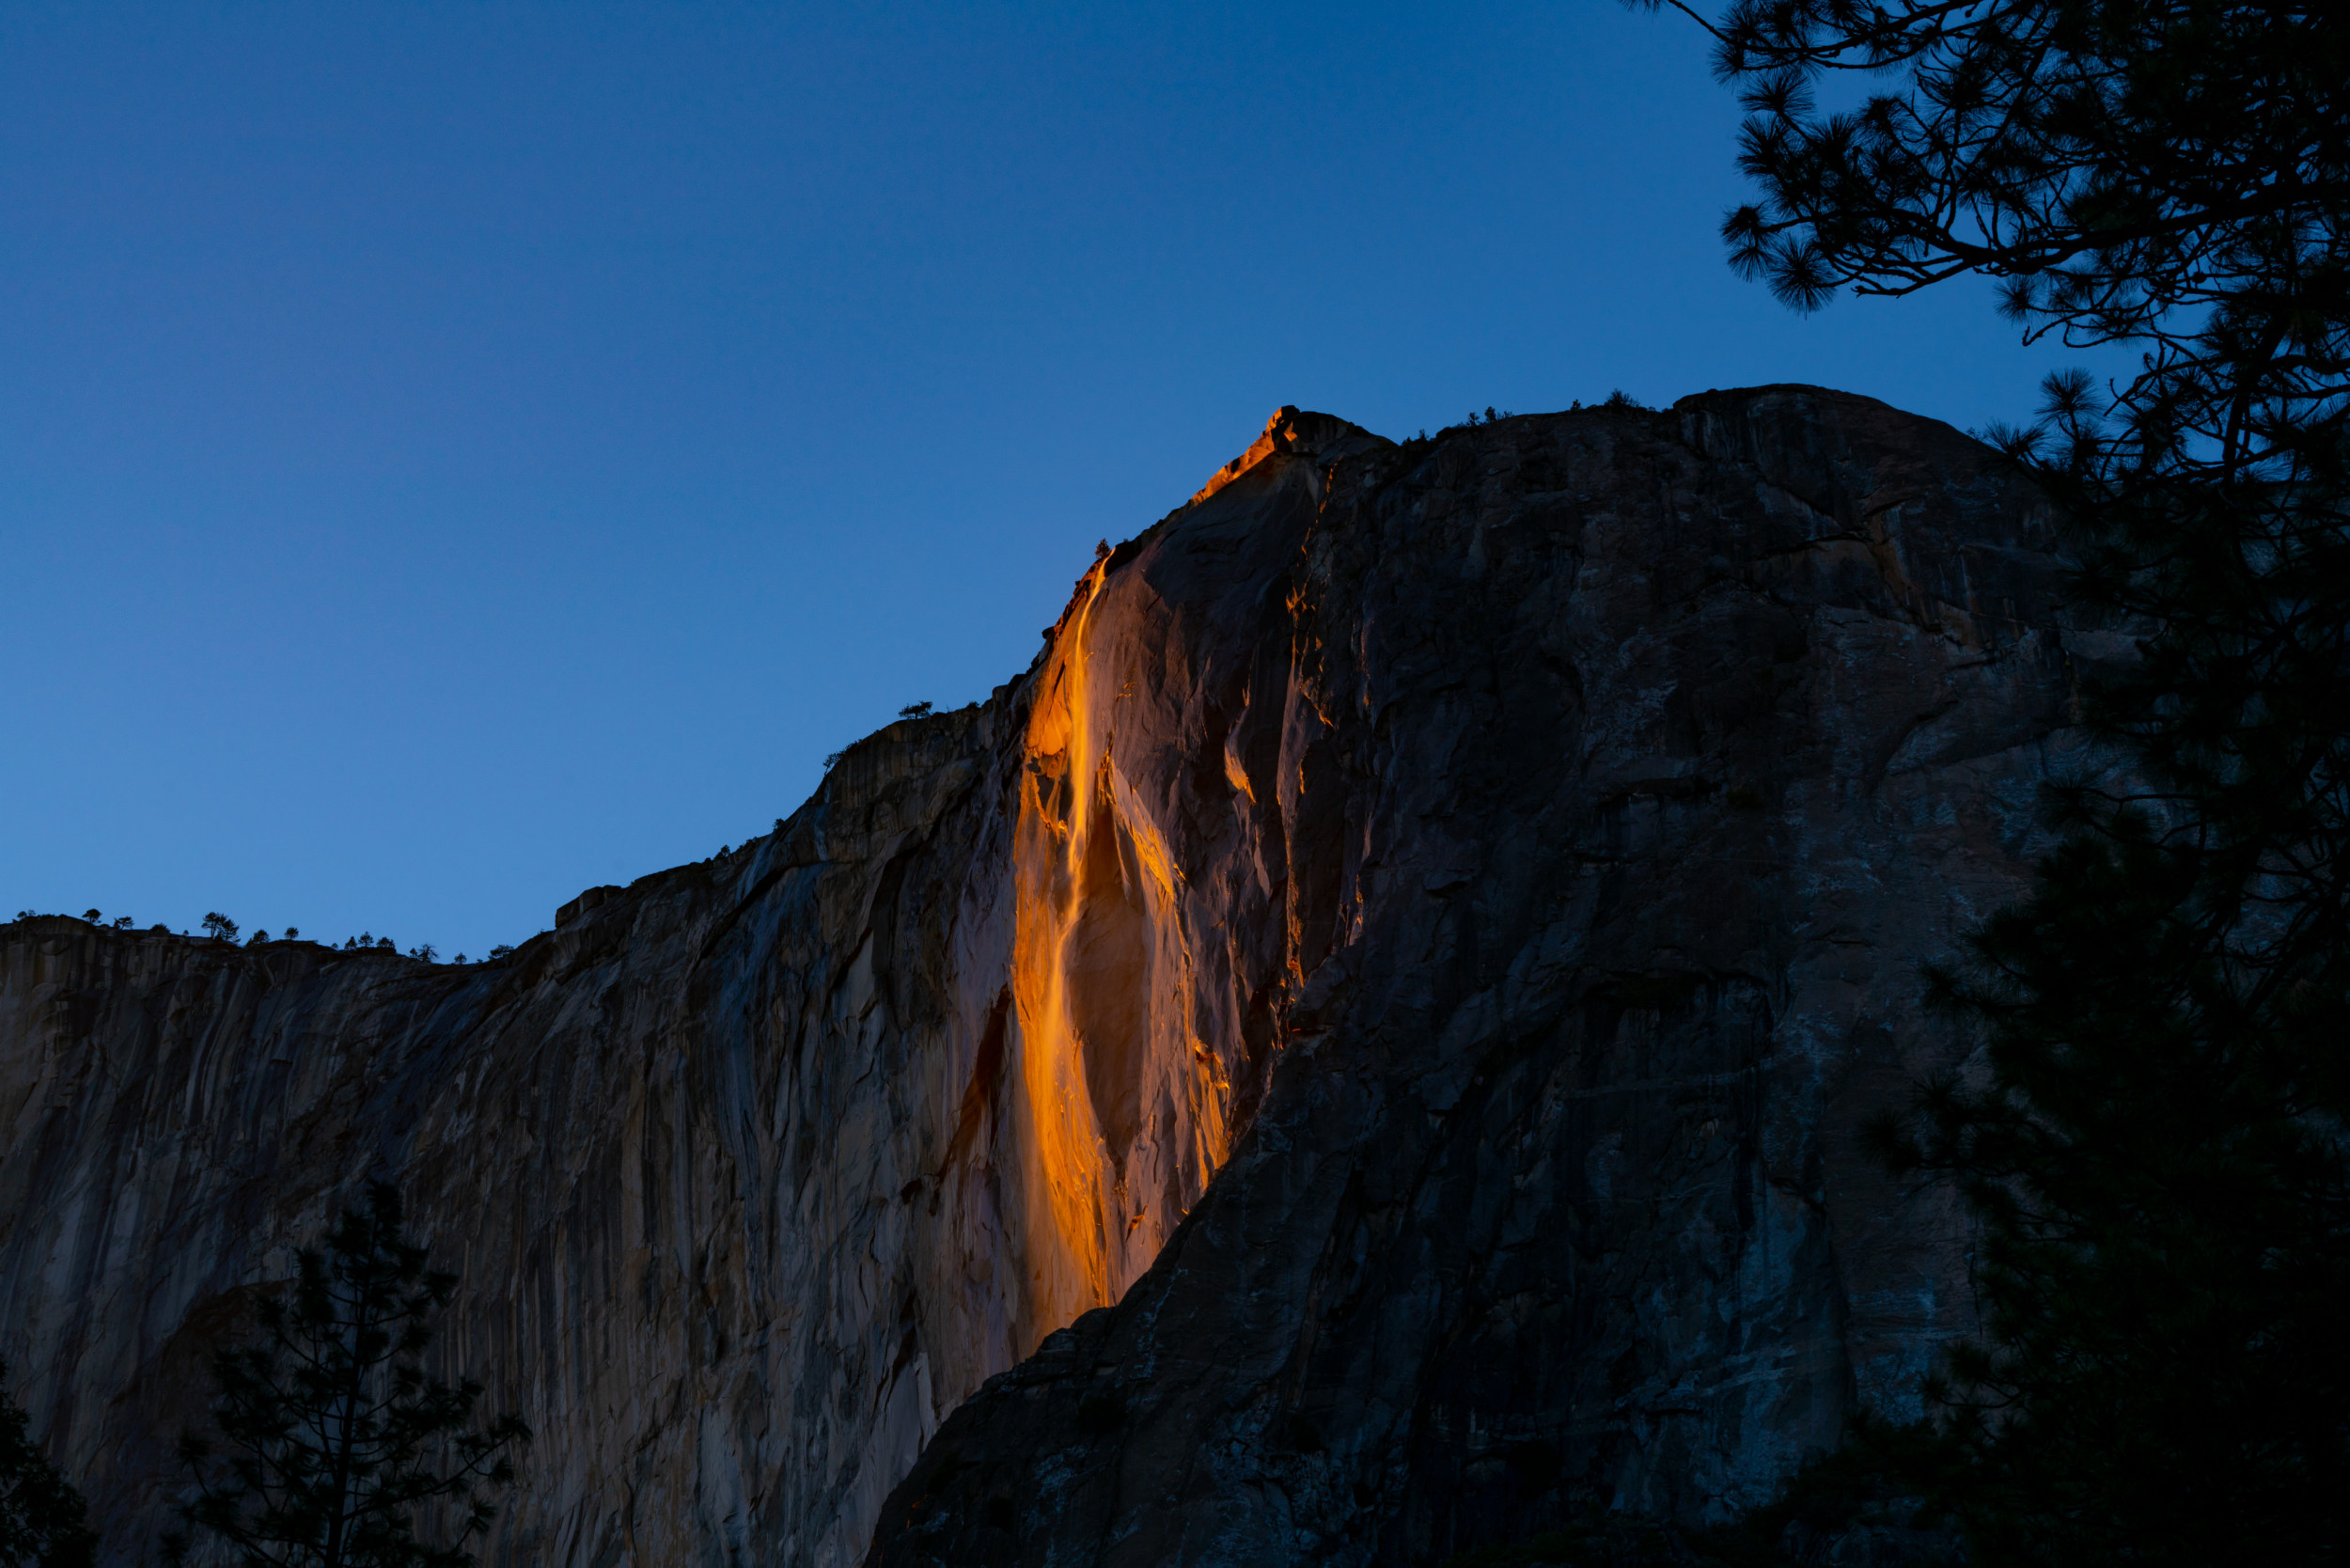 Yosemite Horsetail Fall Is About To Start Glowing How and When To See